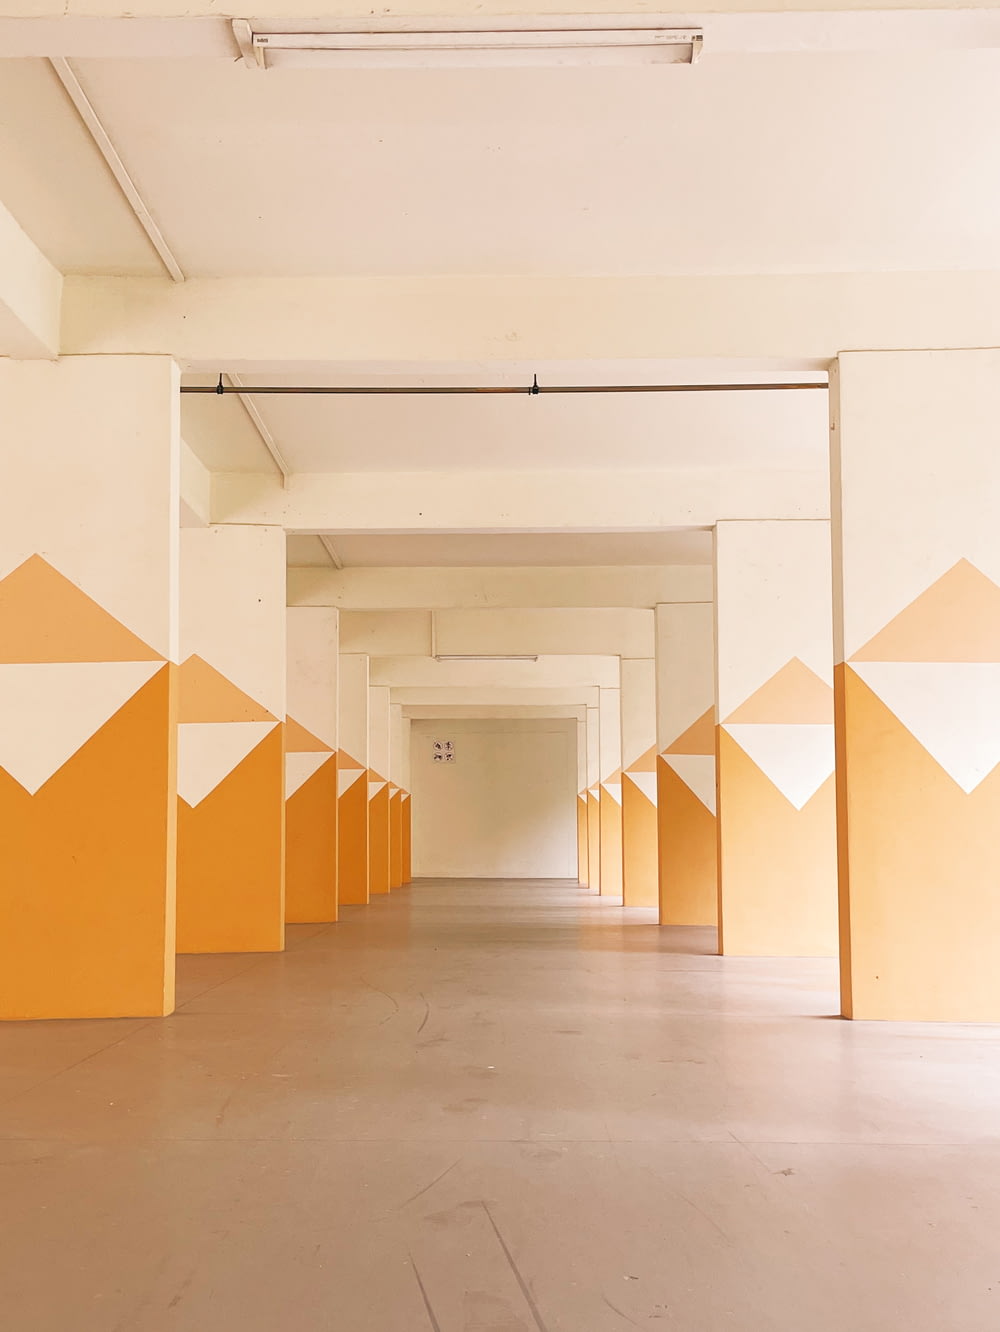 a long hallway with orange and white painted walls